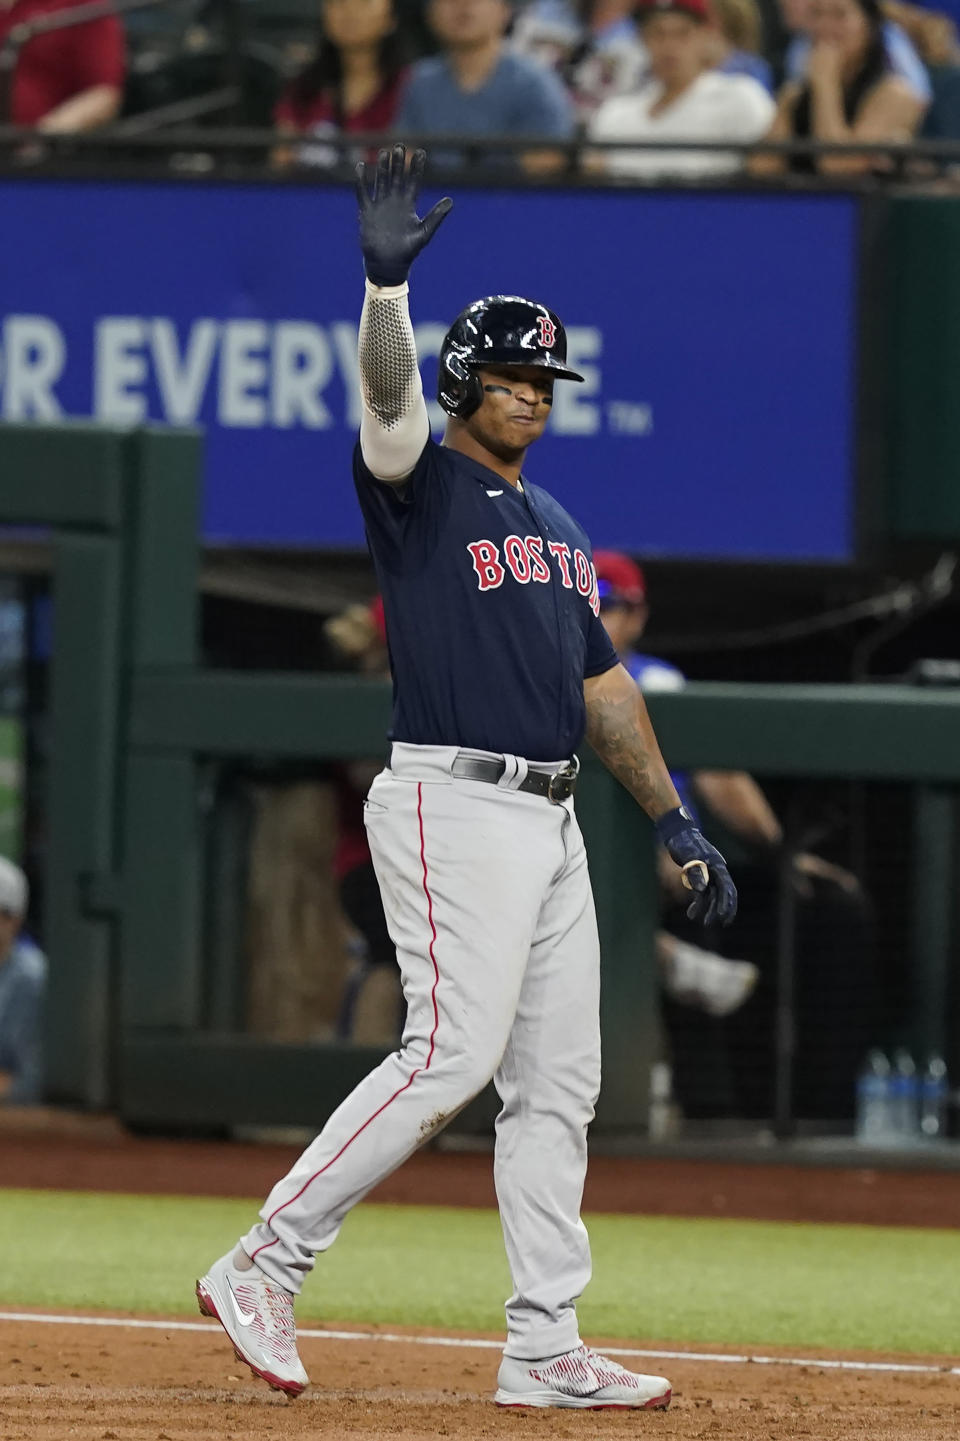 Boston Red Sox's Rafael Devers motions to the team's dugout after hitting an RBI single against the Texas Rangers during the third inning of a baseball game in Arlington, Texas, Friday, May 13, 2022. (AP Photo/LM Otero)